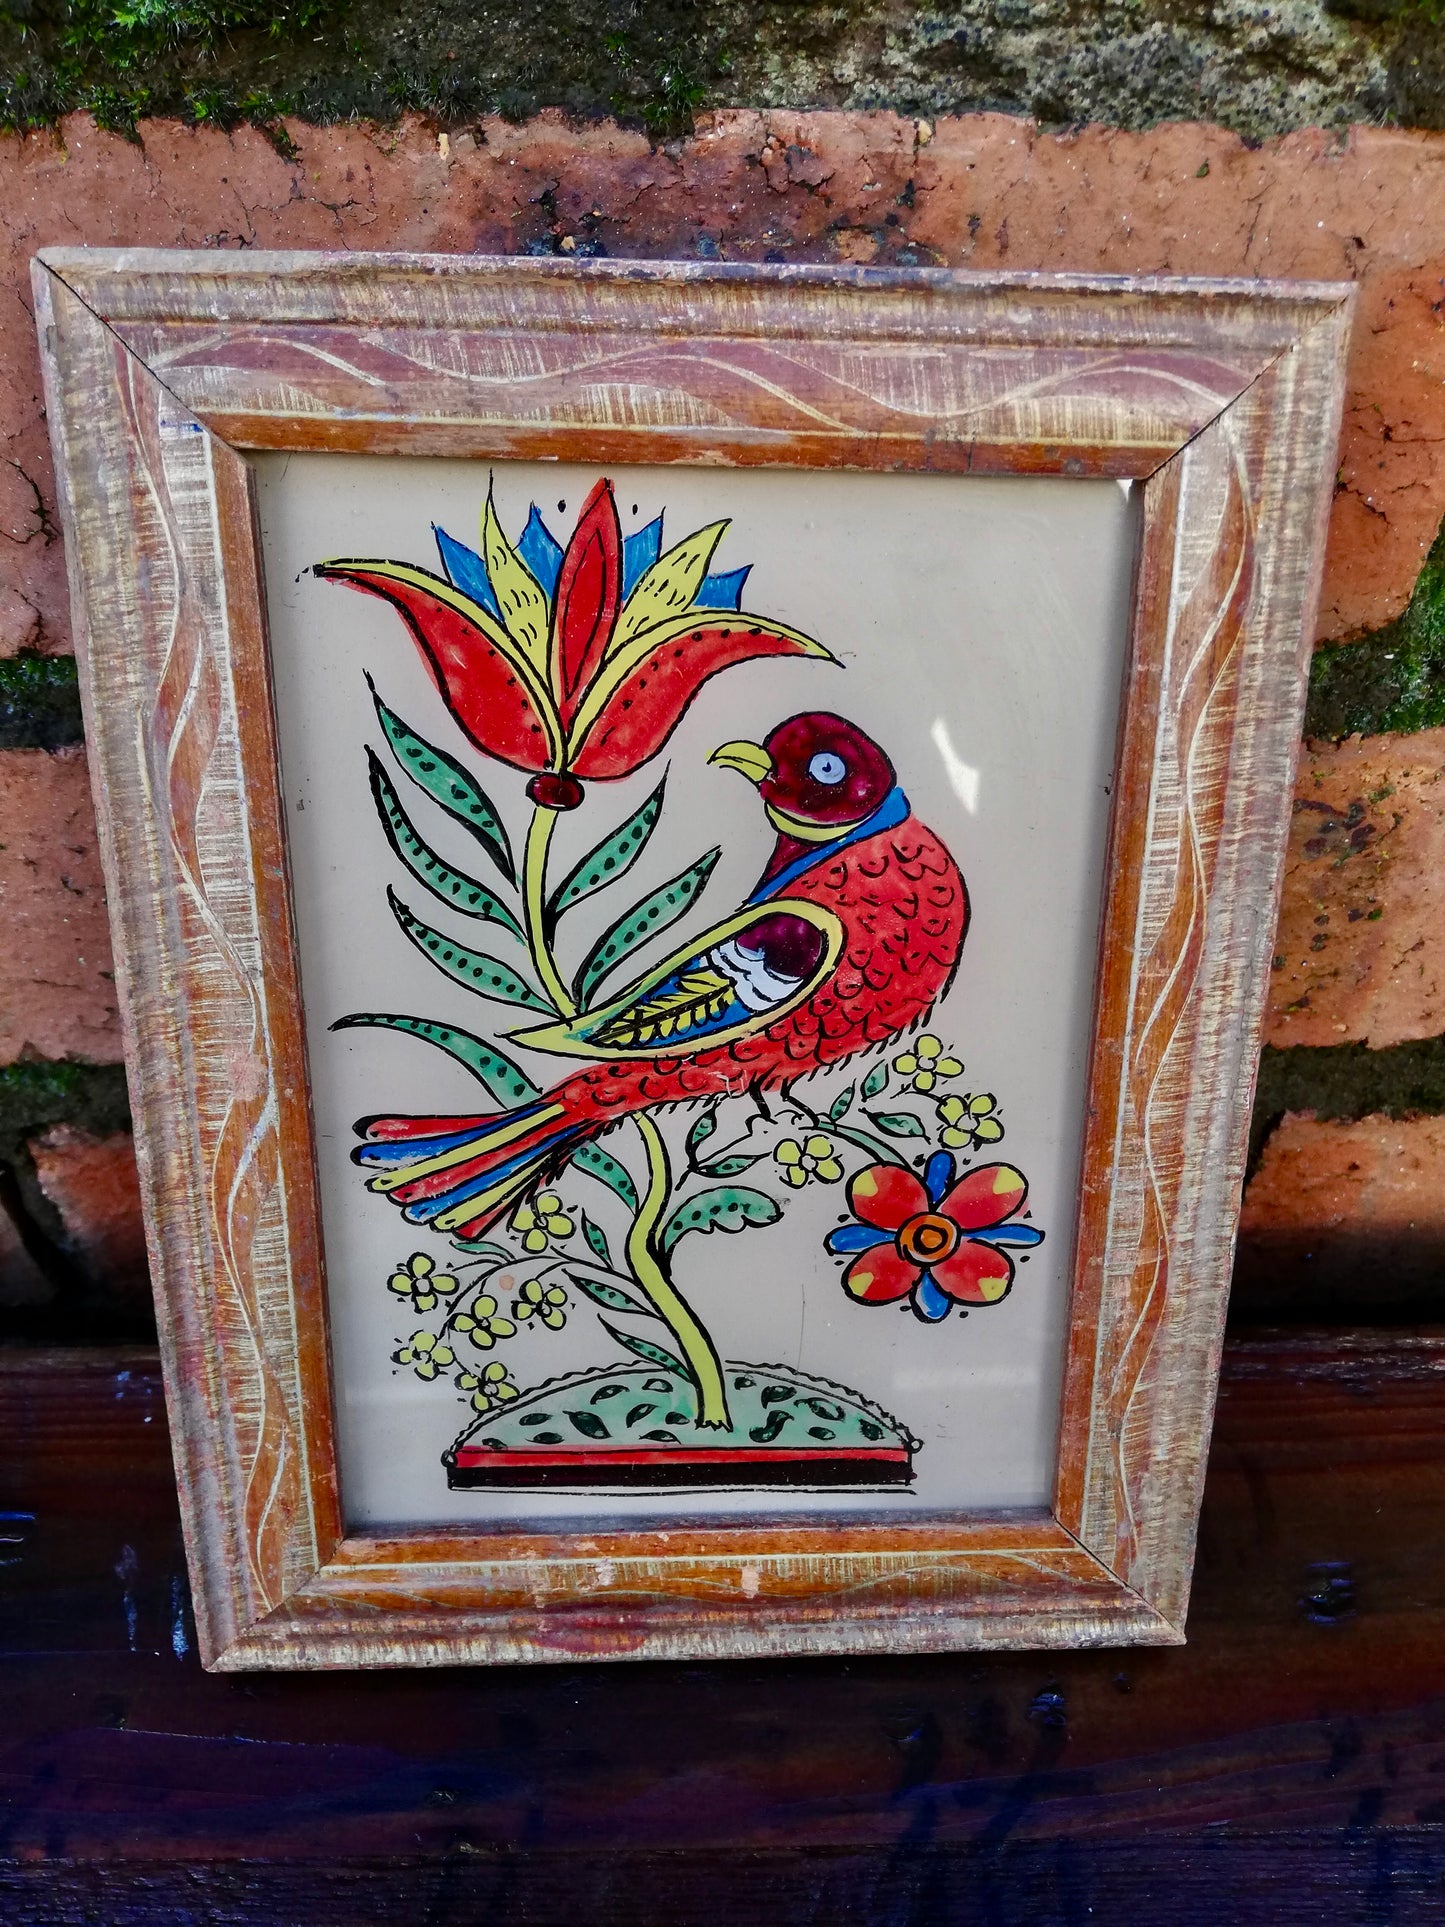 Vintage glass painting of a bird in a beautiful original frame